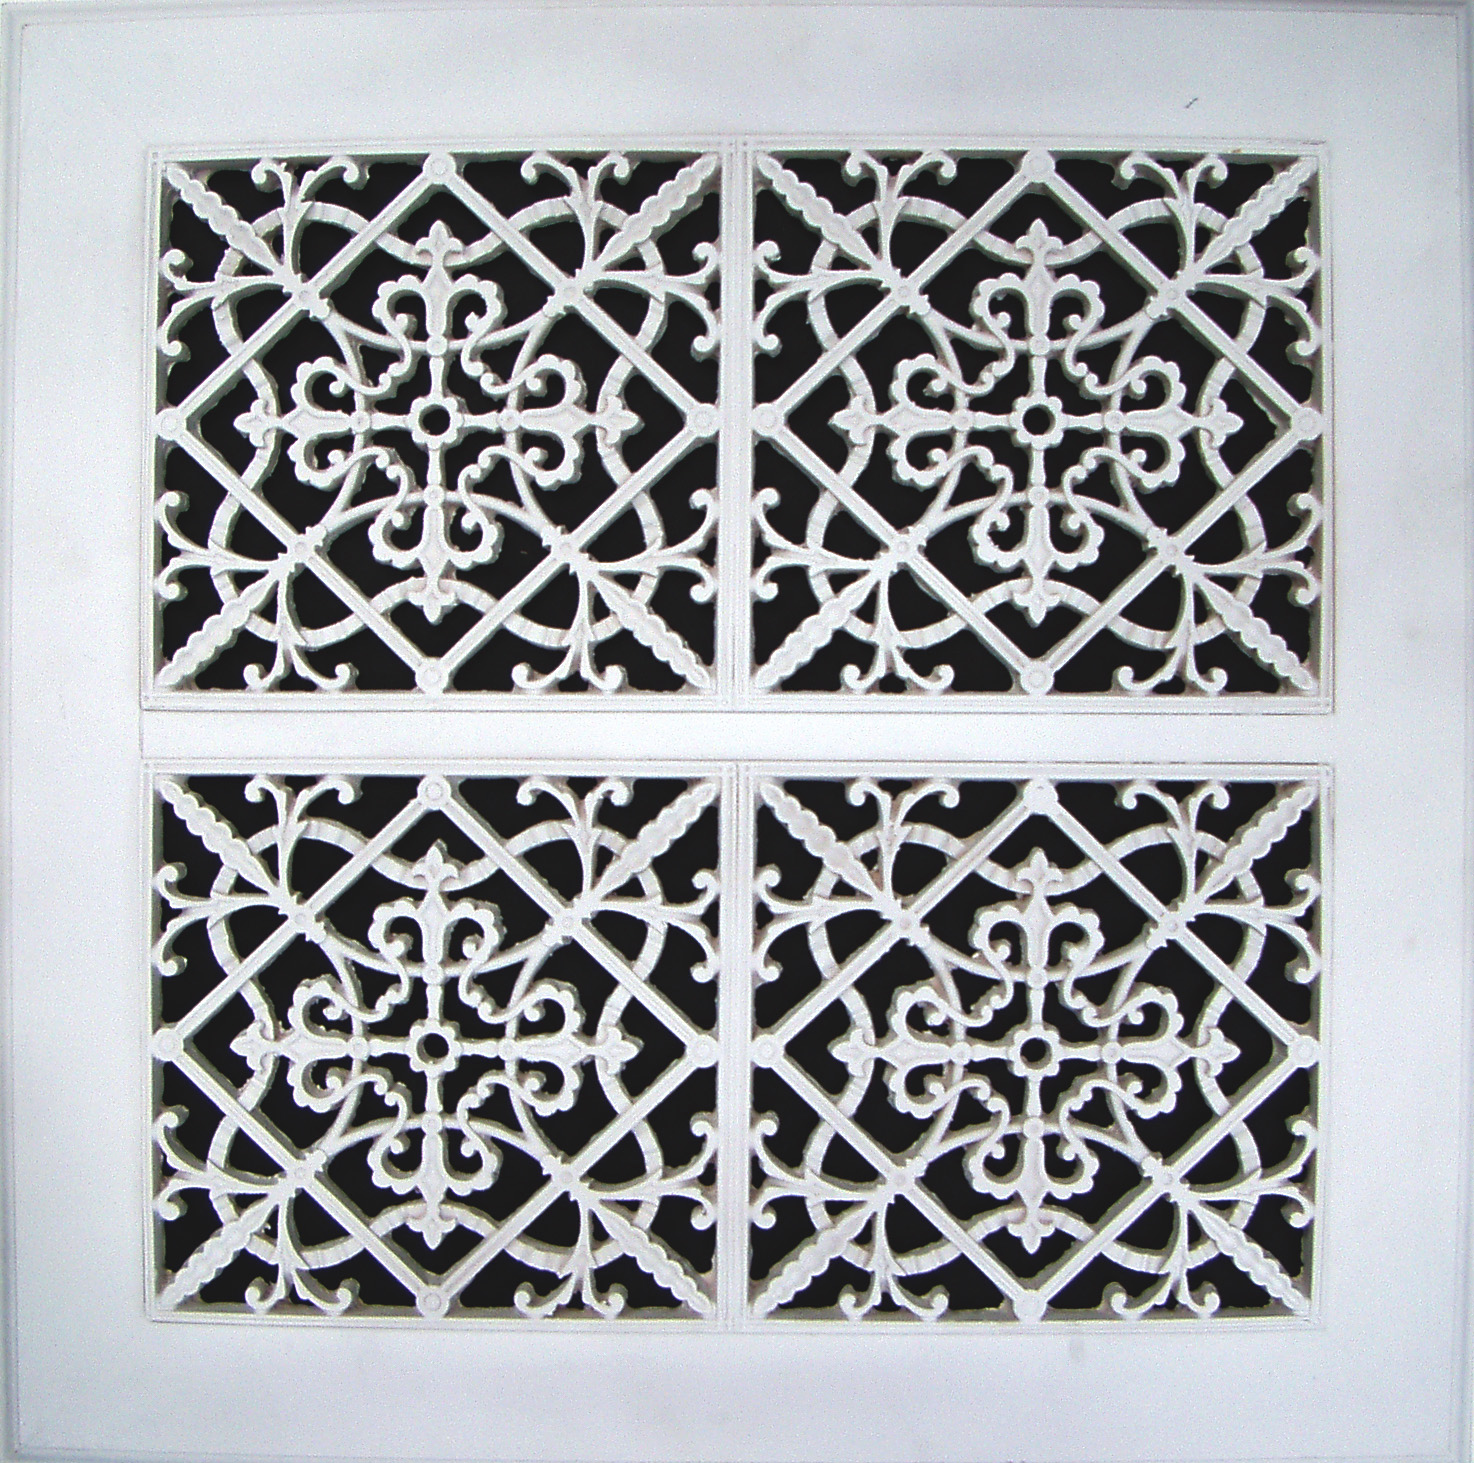 Old Arts and Crafts decorative grille 24x24